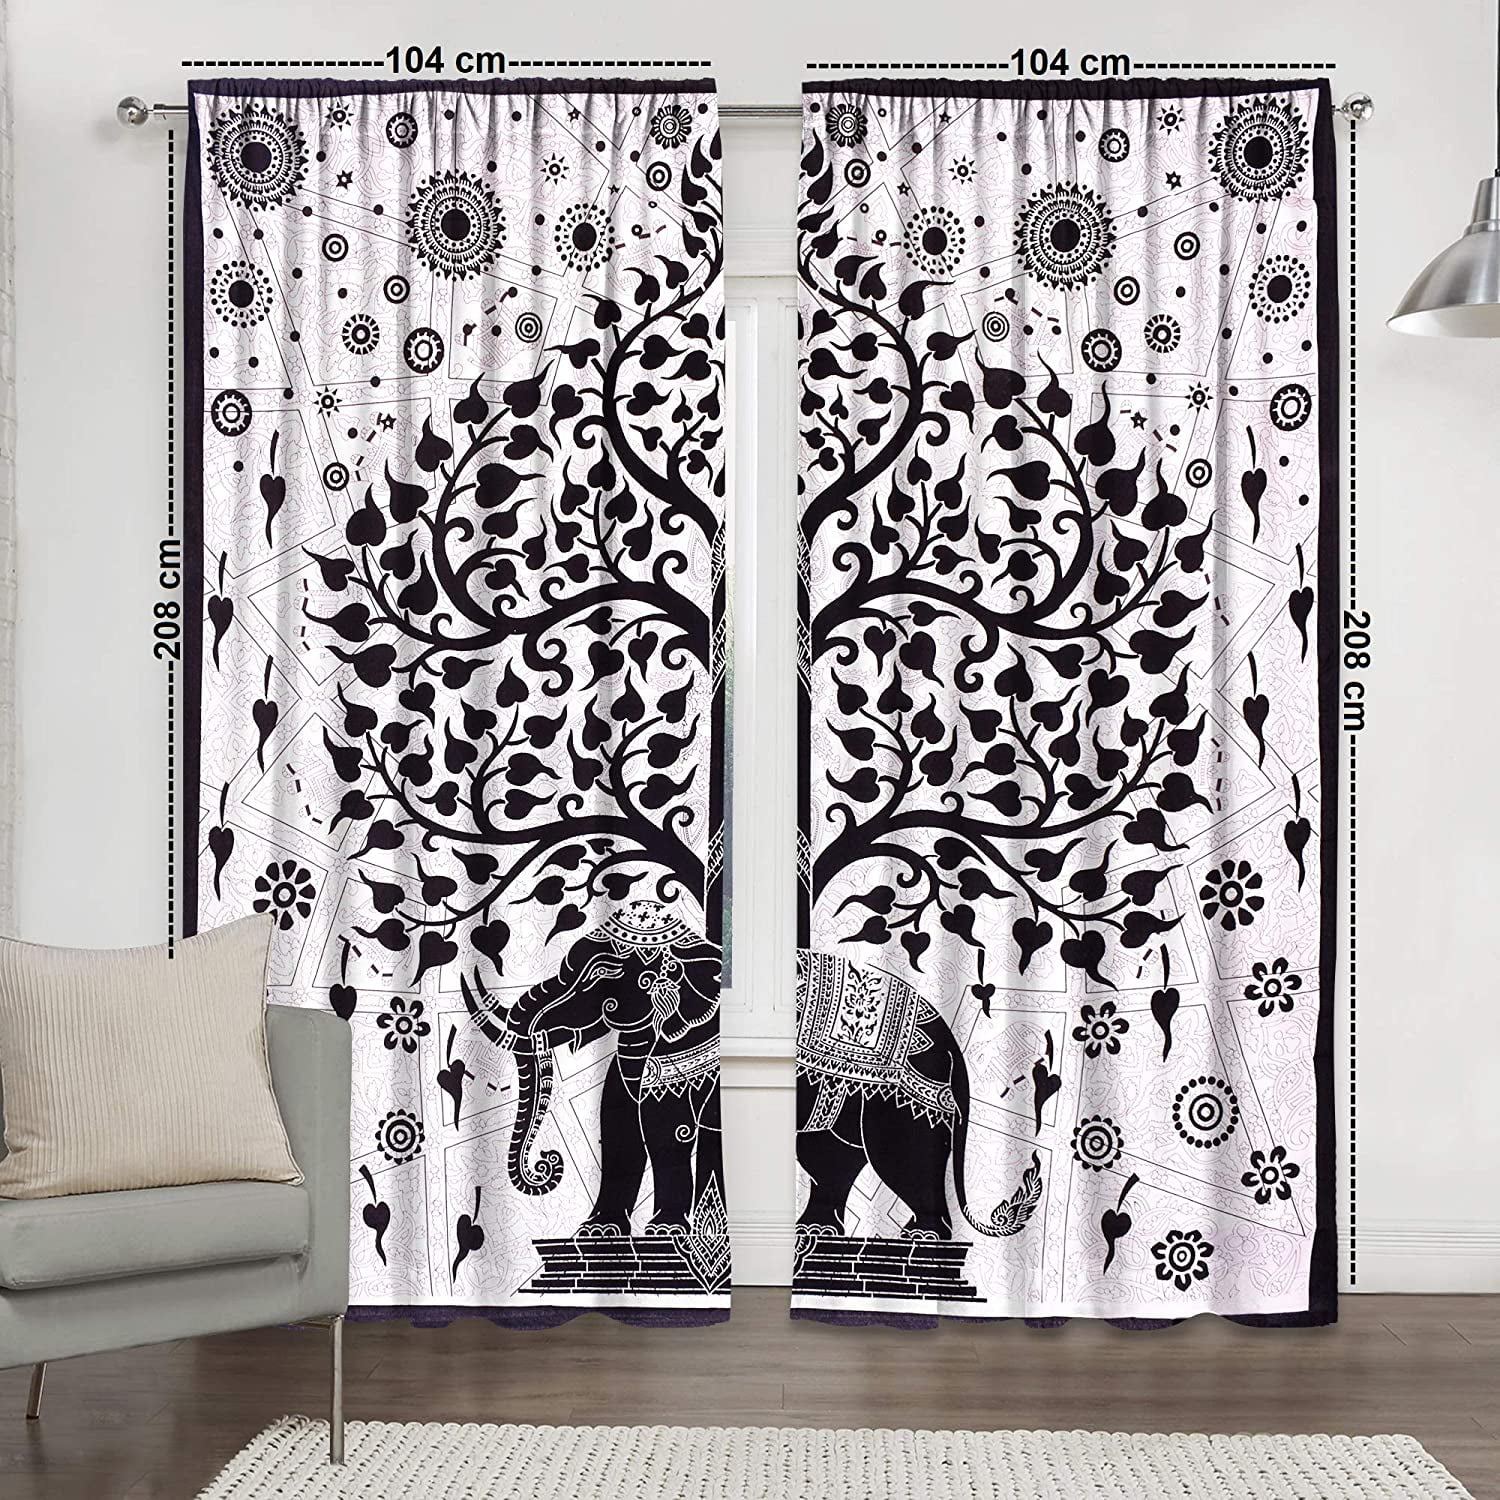 Indian Wall Tapestry Door Curtains Hippie Window Drapery Hangings Valances Decor 